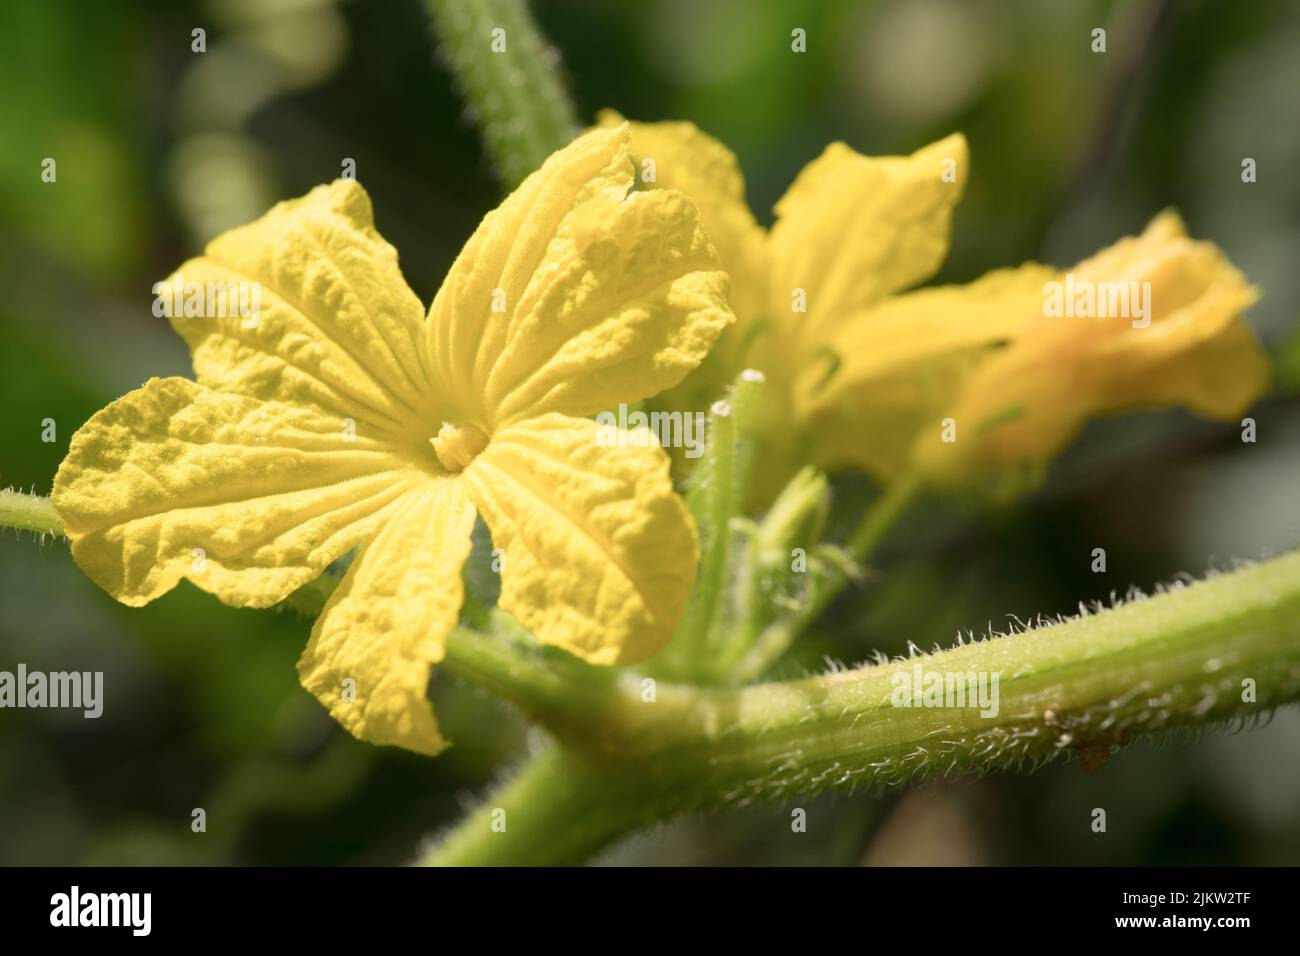 A closeup shot of yellow loofah flowers on blurry background Stock Photo